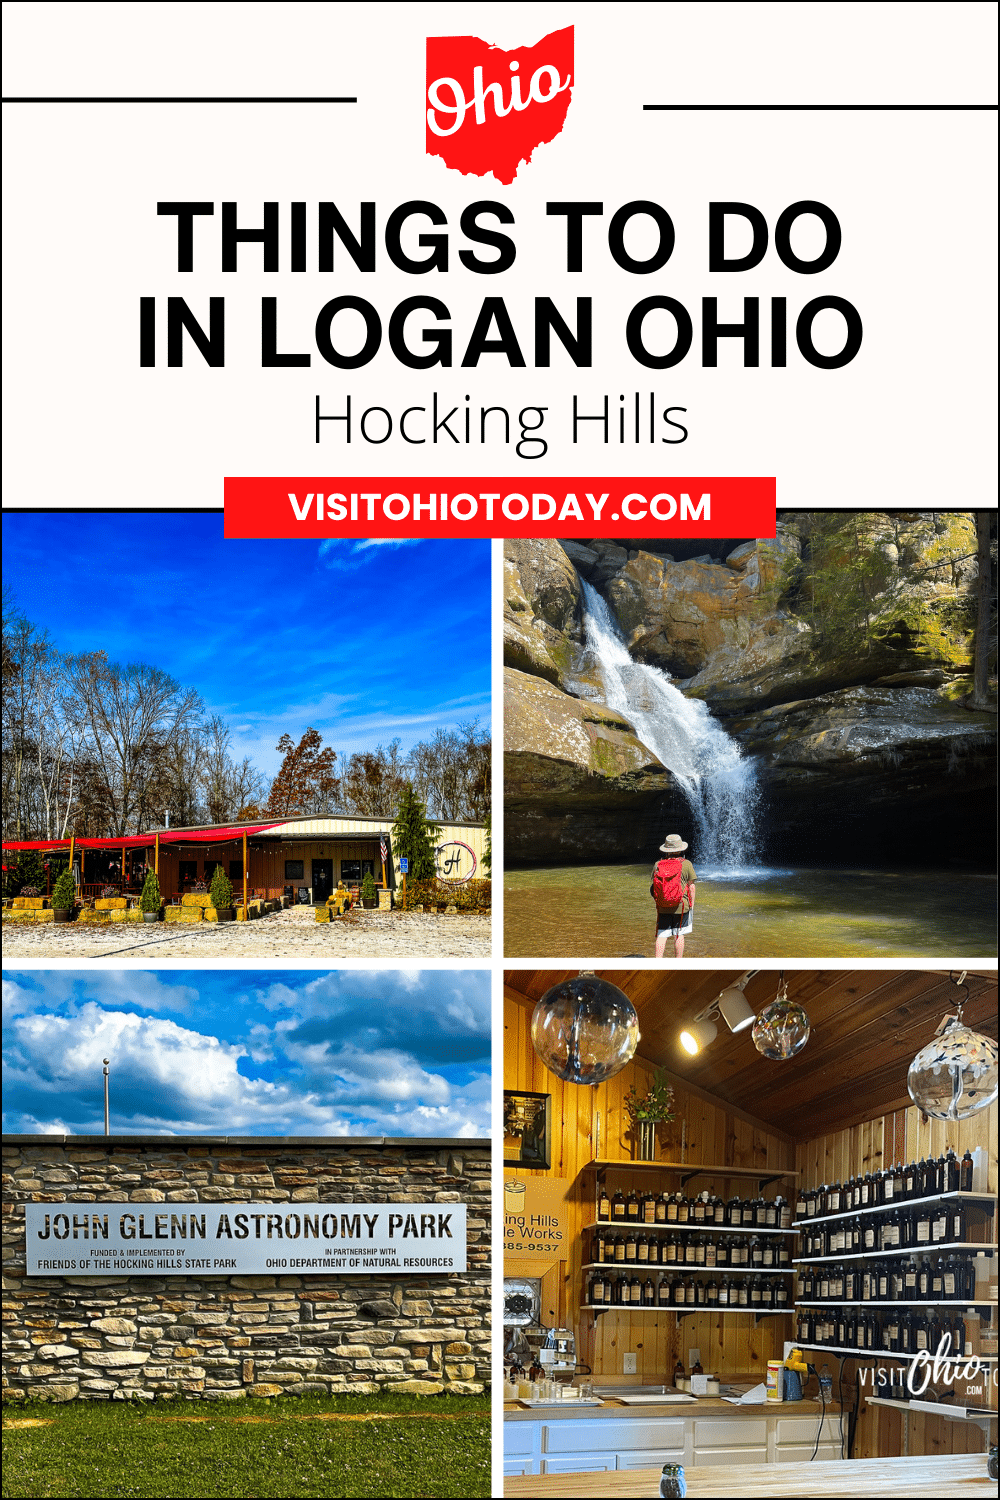 Are you looking for things to do in Logan Ohio? This town is right in the heart of Hocking Hills and there are so many things to do in Logan Ohio! Read on to find the most popular things to do in Logan Ohio! #loganohio #ohio #hockinghills